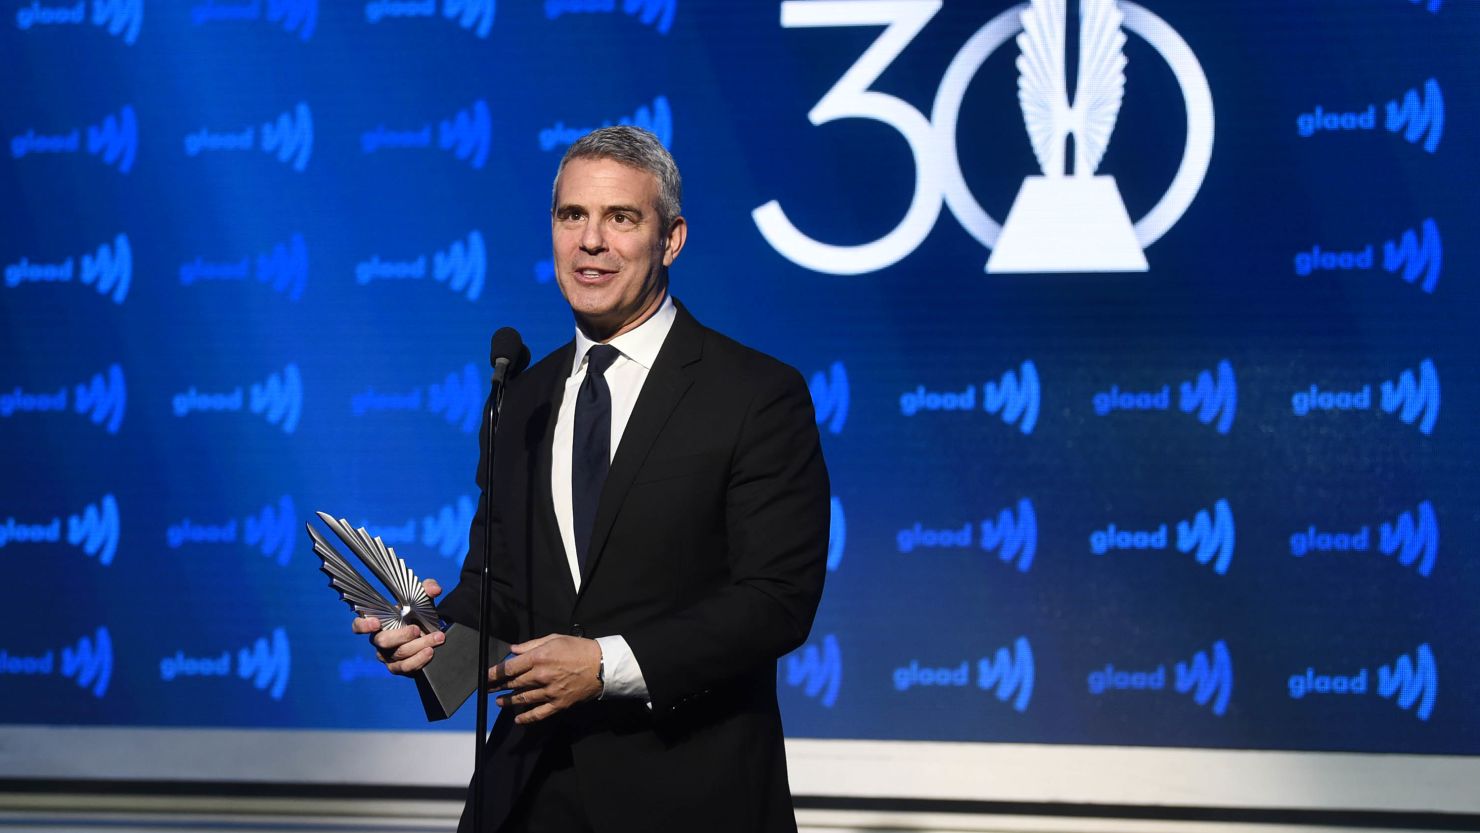 Andy Cohen accepts an award onstage during the 30th Annual GLAAD Media Awards New York 